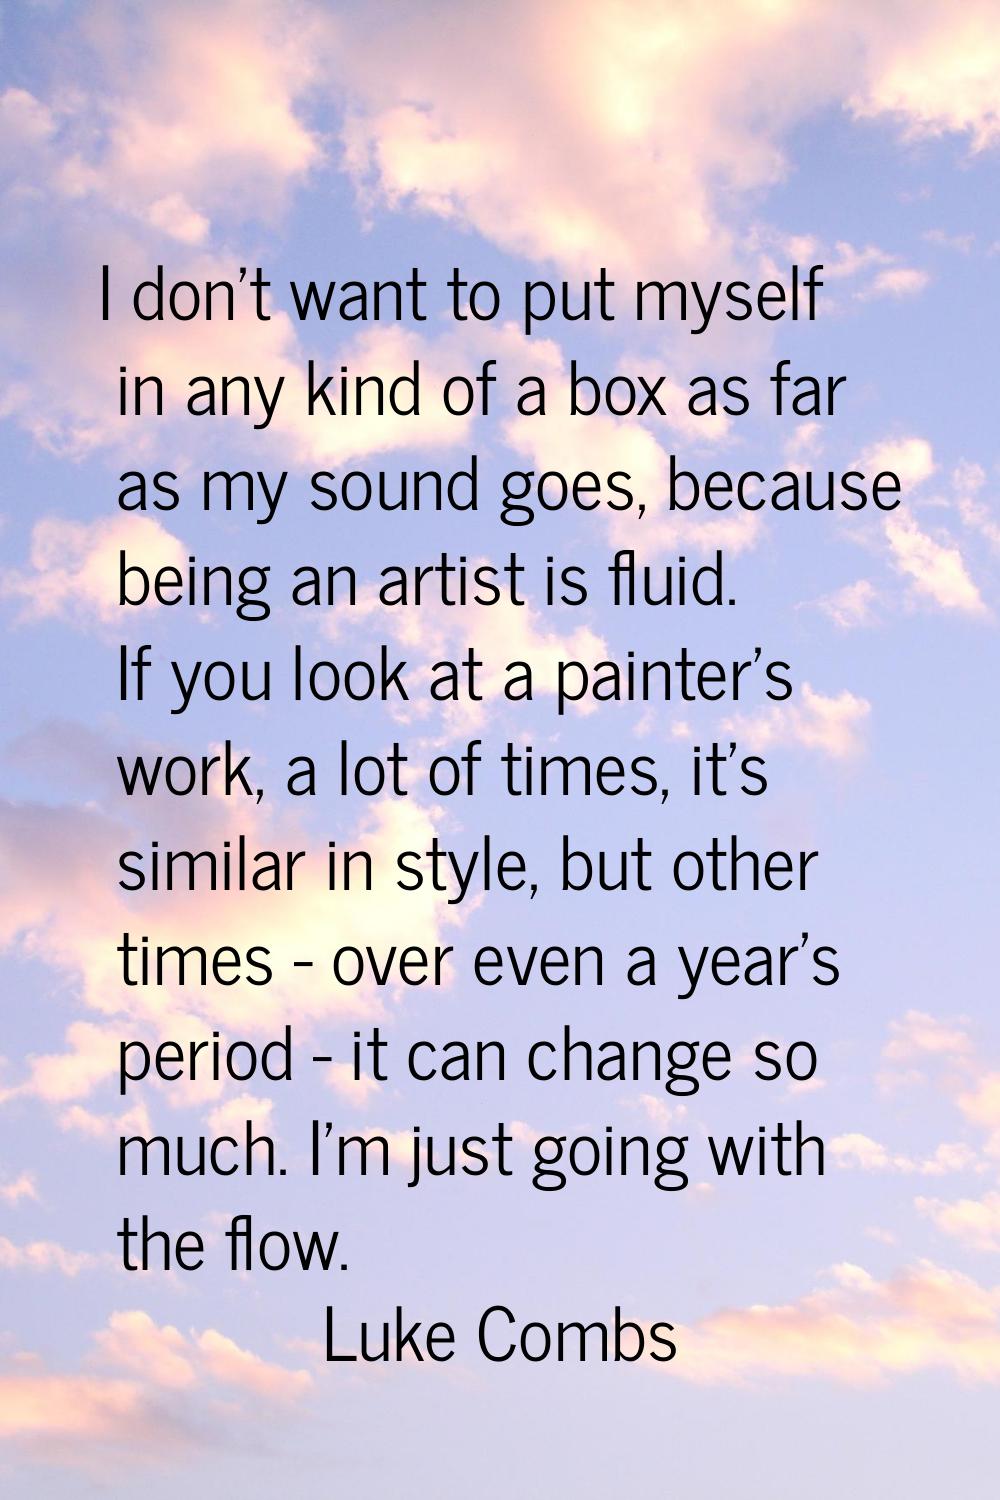 I don't want to put myself in any kind of a box as far as my sound goes, because being an artist is